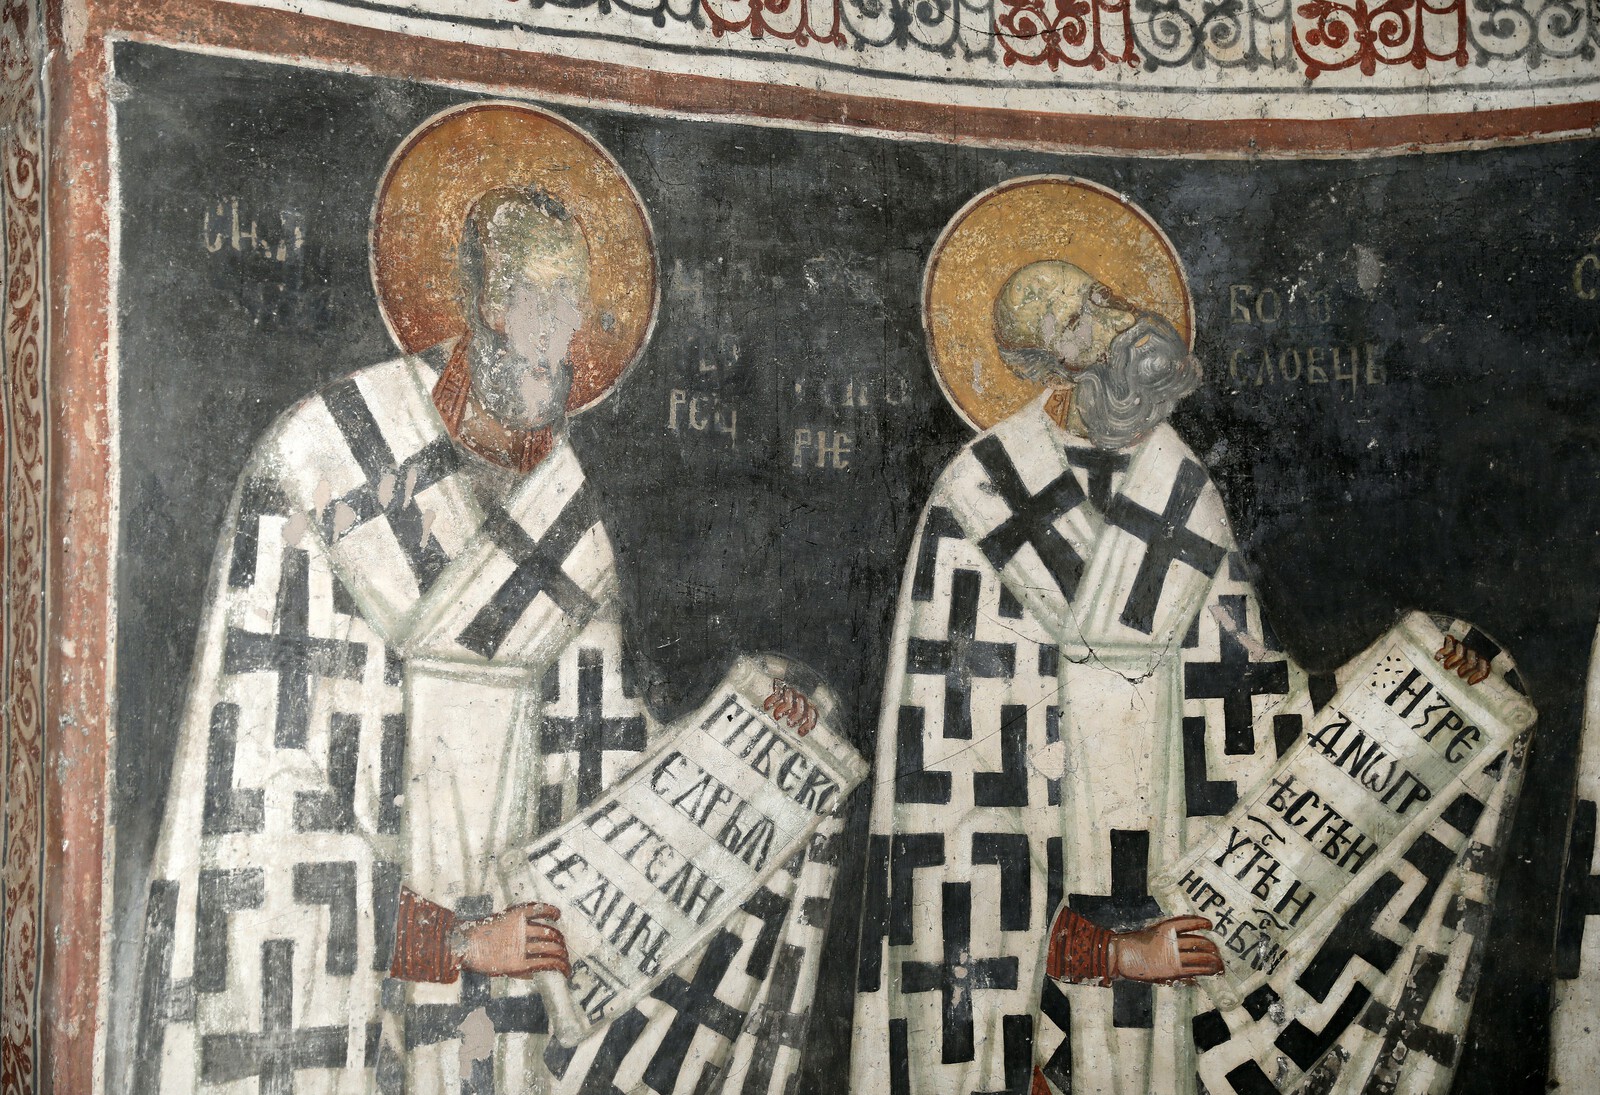 Officiating Church Fathers